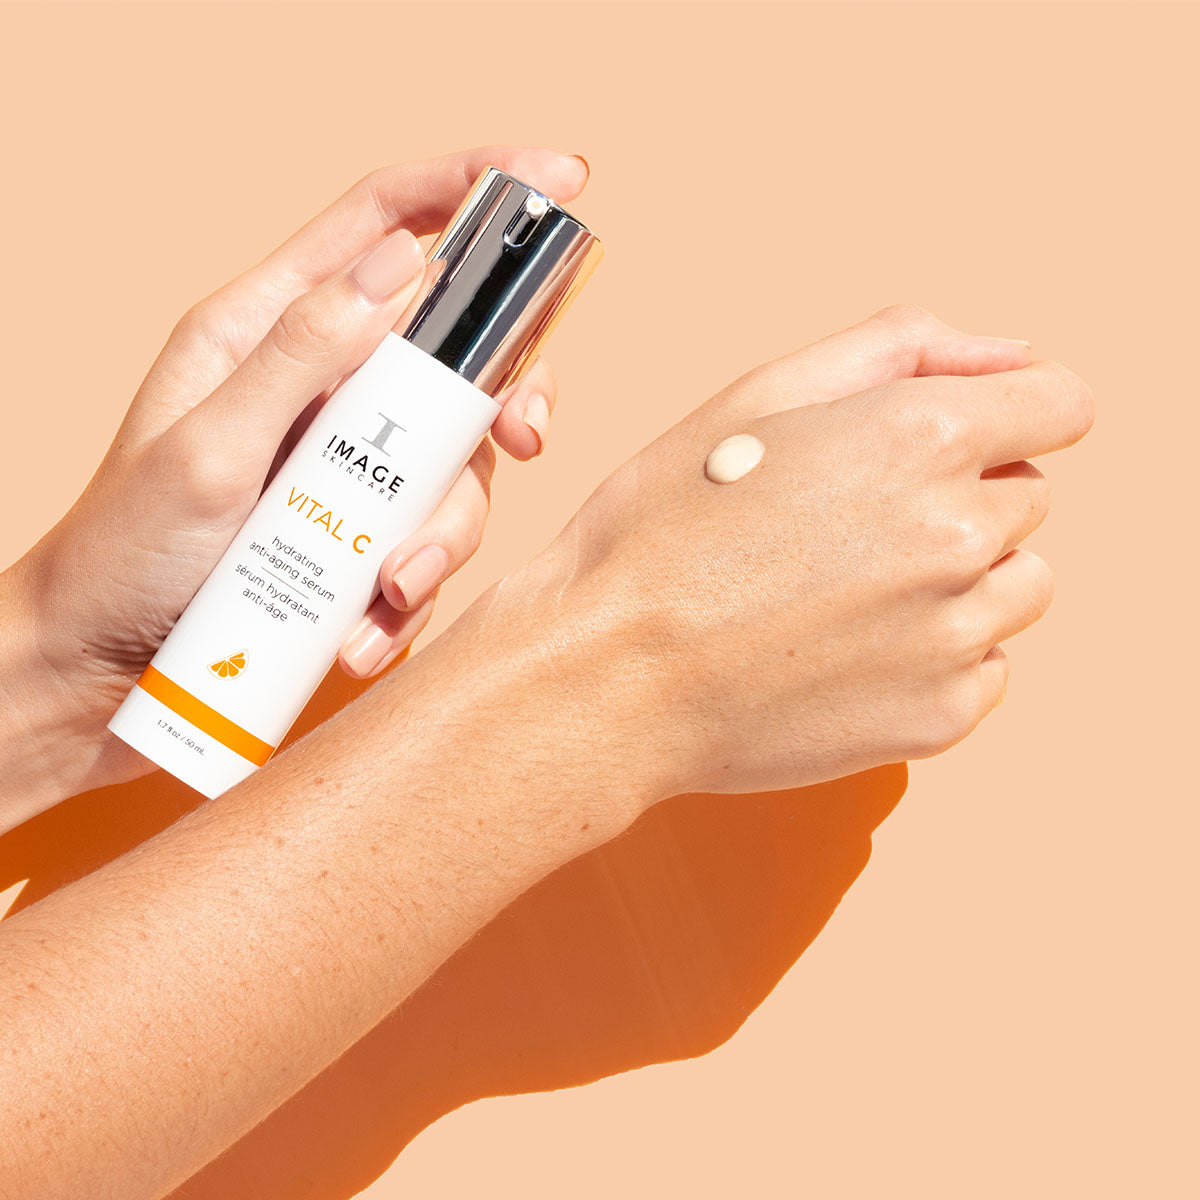 A pair of hands holding the anti aging VITAL C serum by Image Skincare.